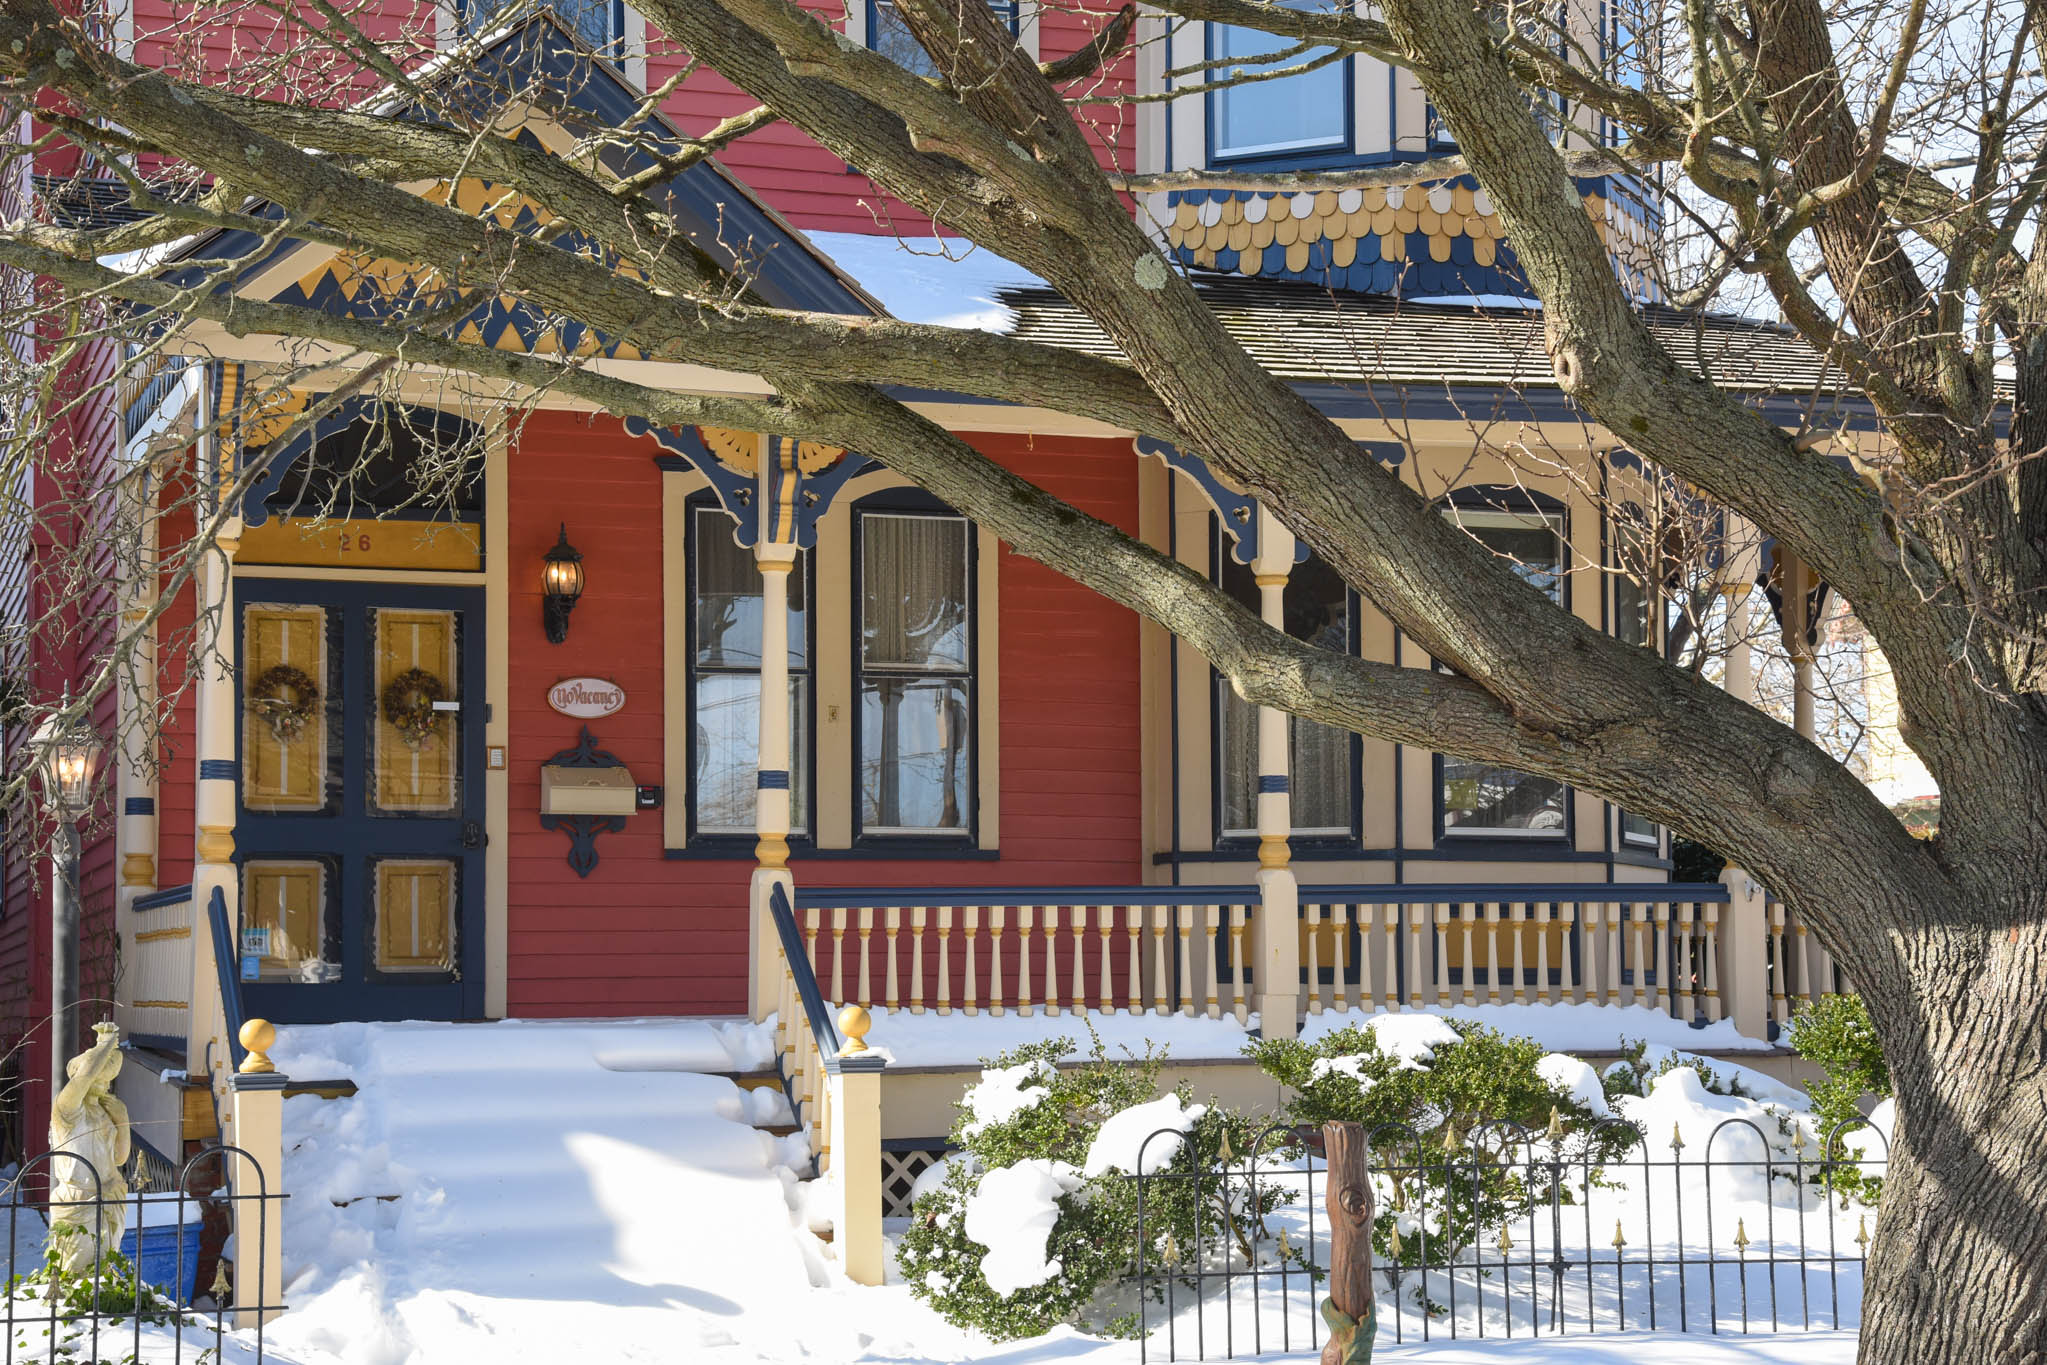 The Columbia House with a Snowy Porch